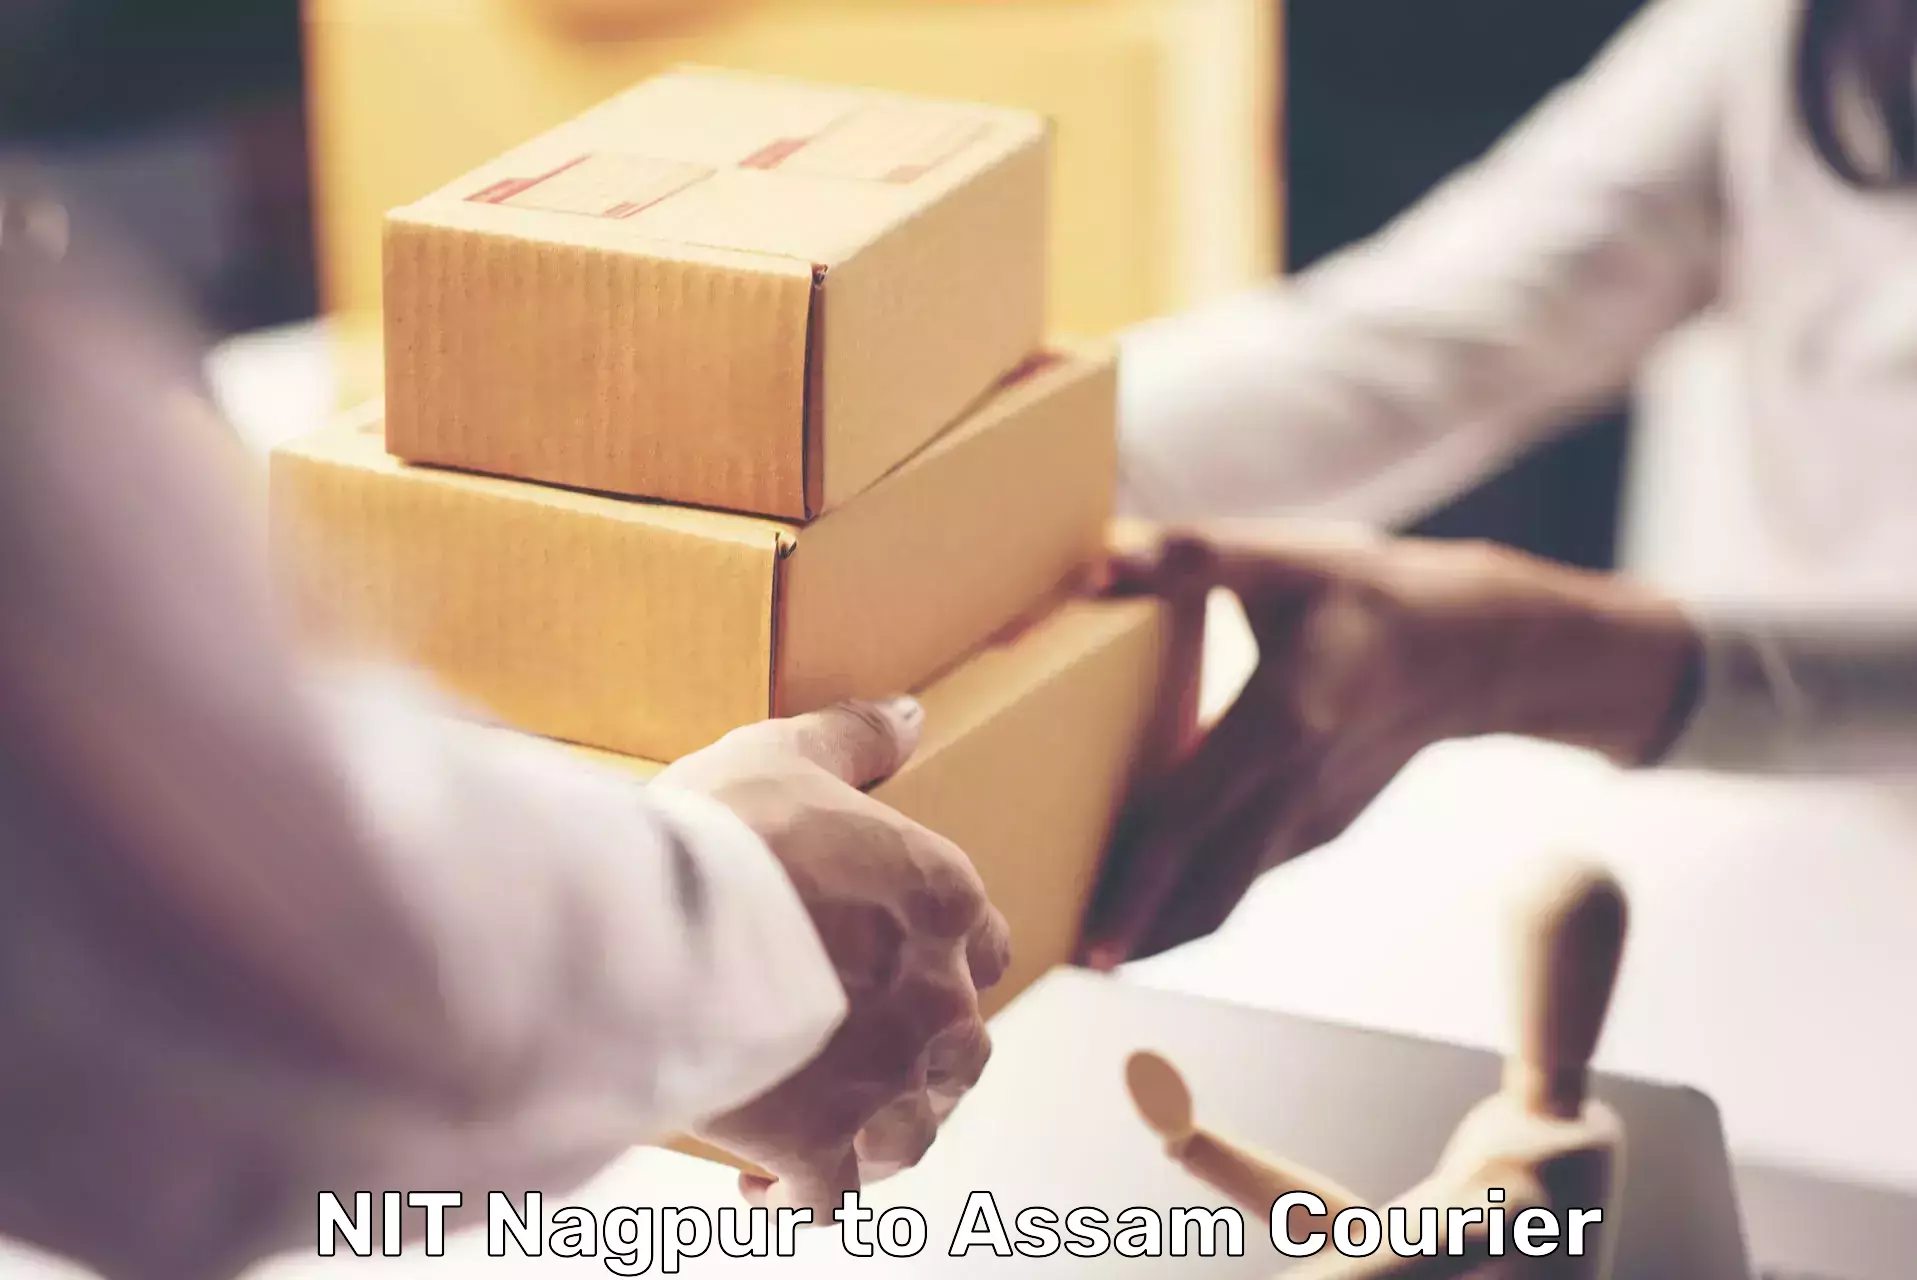 International courier networks NIT Nagpur to Kampur